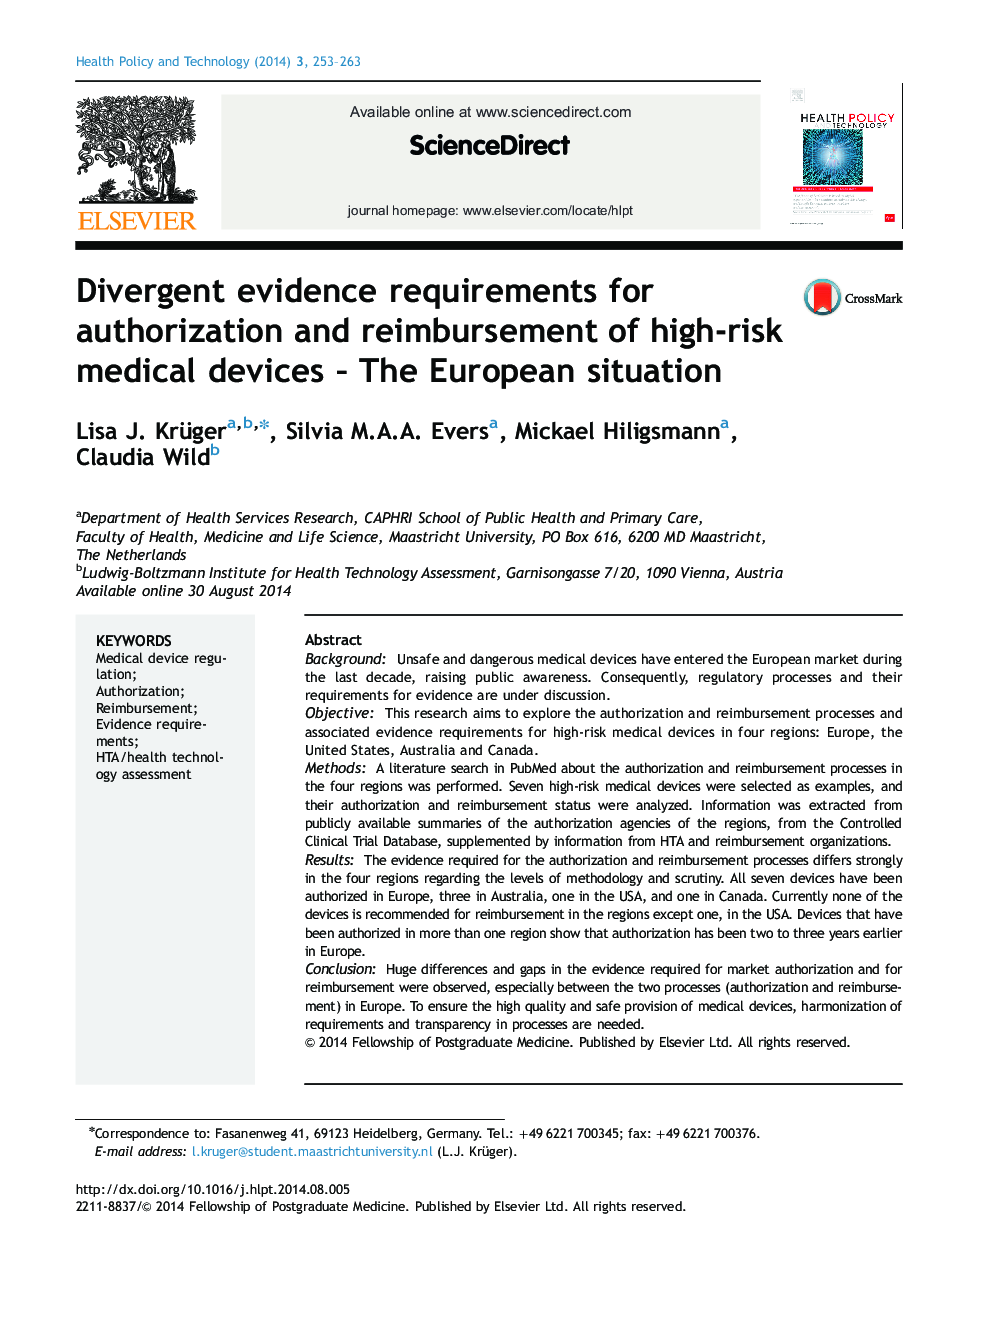 Divergent evidence requirements for authorization and reimbursement of high-risk medical devices – The European situation